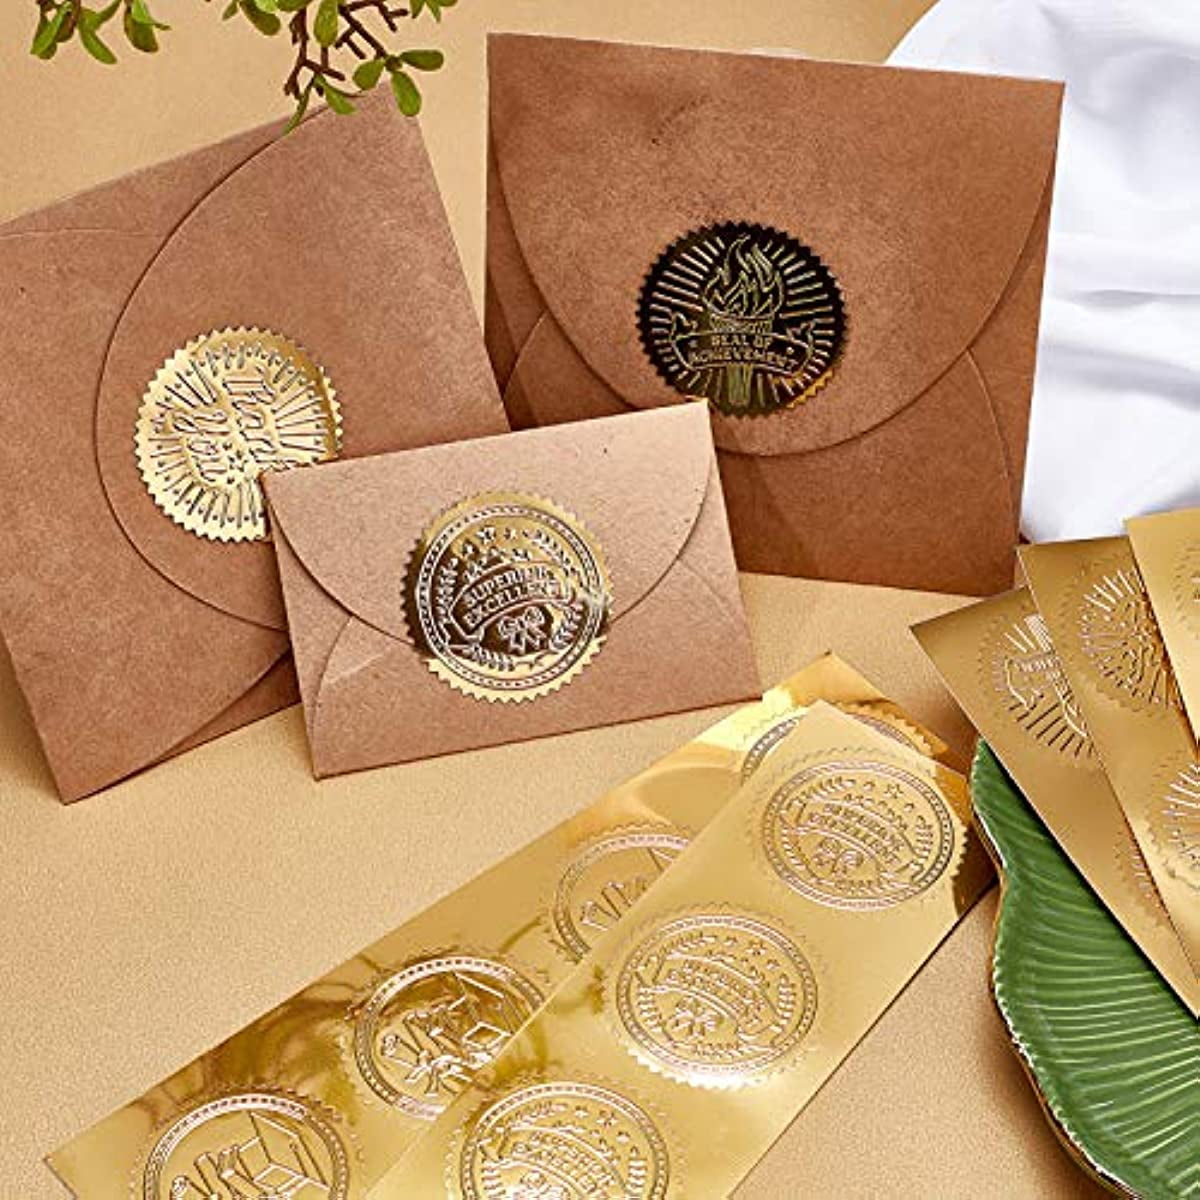  Pasimy 360 Pcs Gold Foil Embossed Certificate Seals 2 Round  You Make a Difference Self Adhesive Embossed Seals Gold Seal Stickers Medal  Decoration Labels for Envelopes Diplomas Certificates Awards 